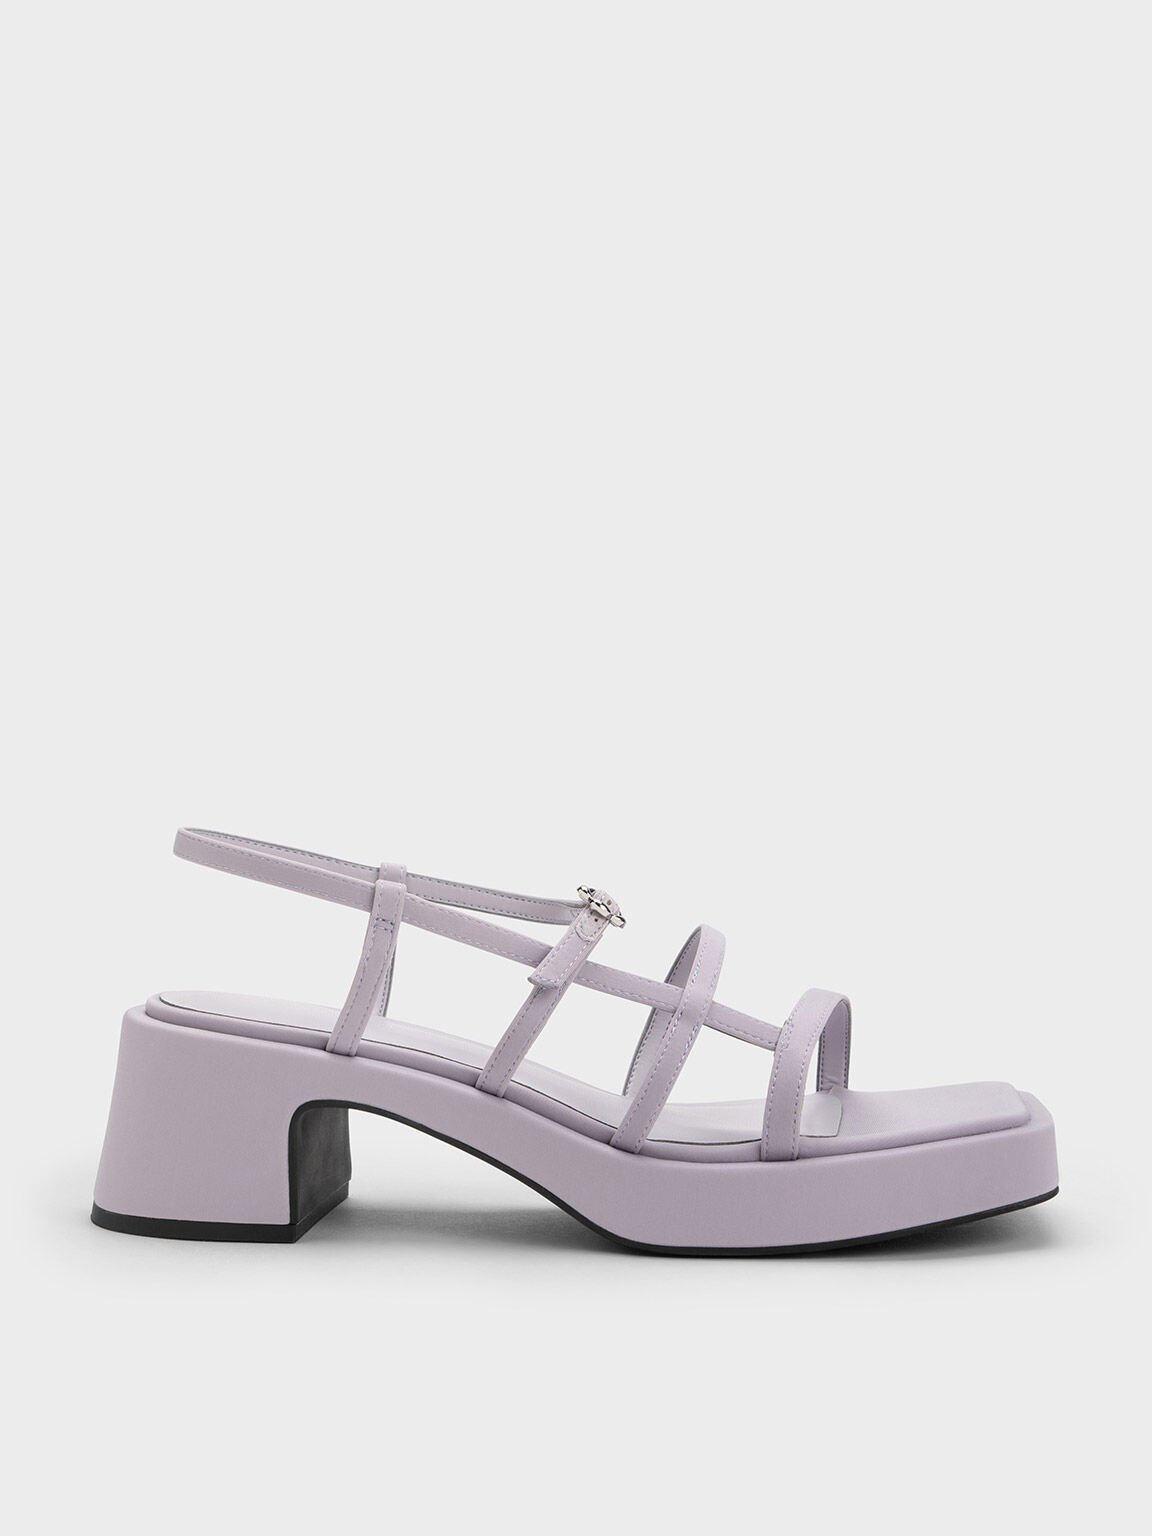 Flower-Buckle Strappy Sandals, Lilac, hi-res